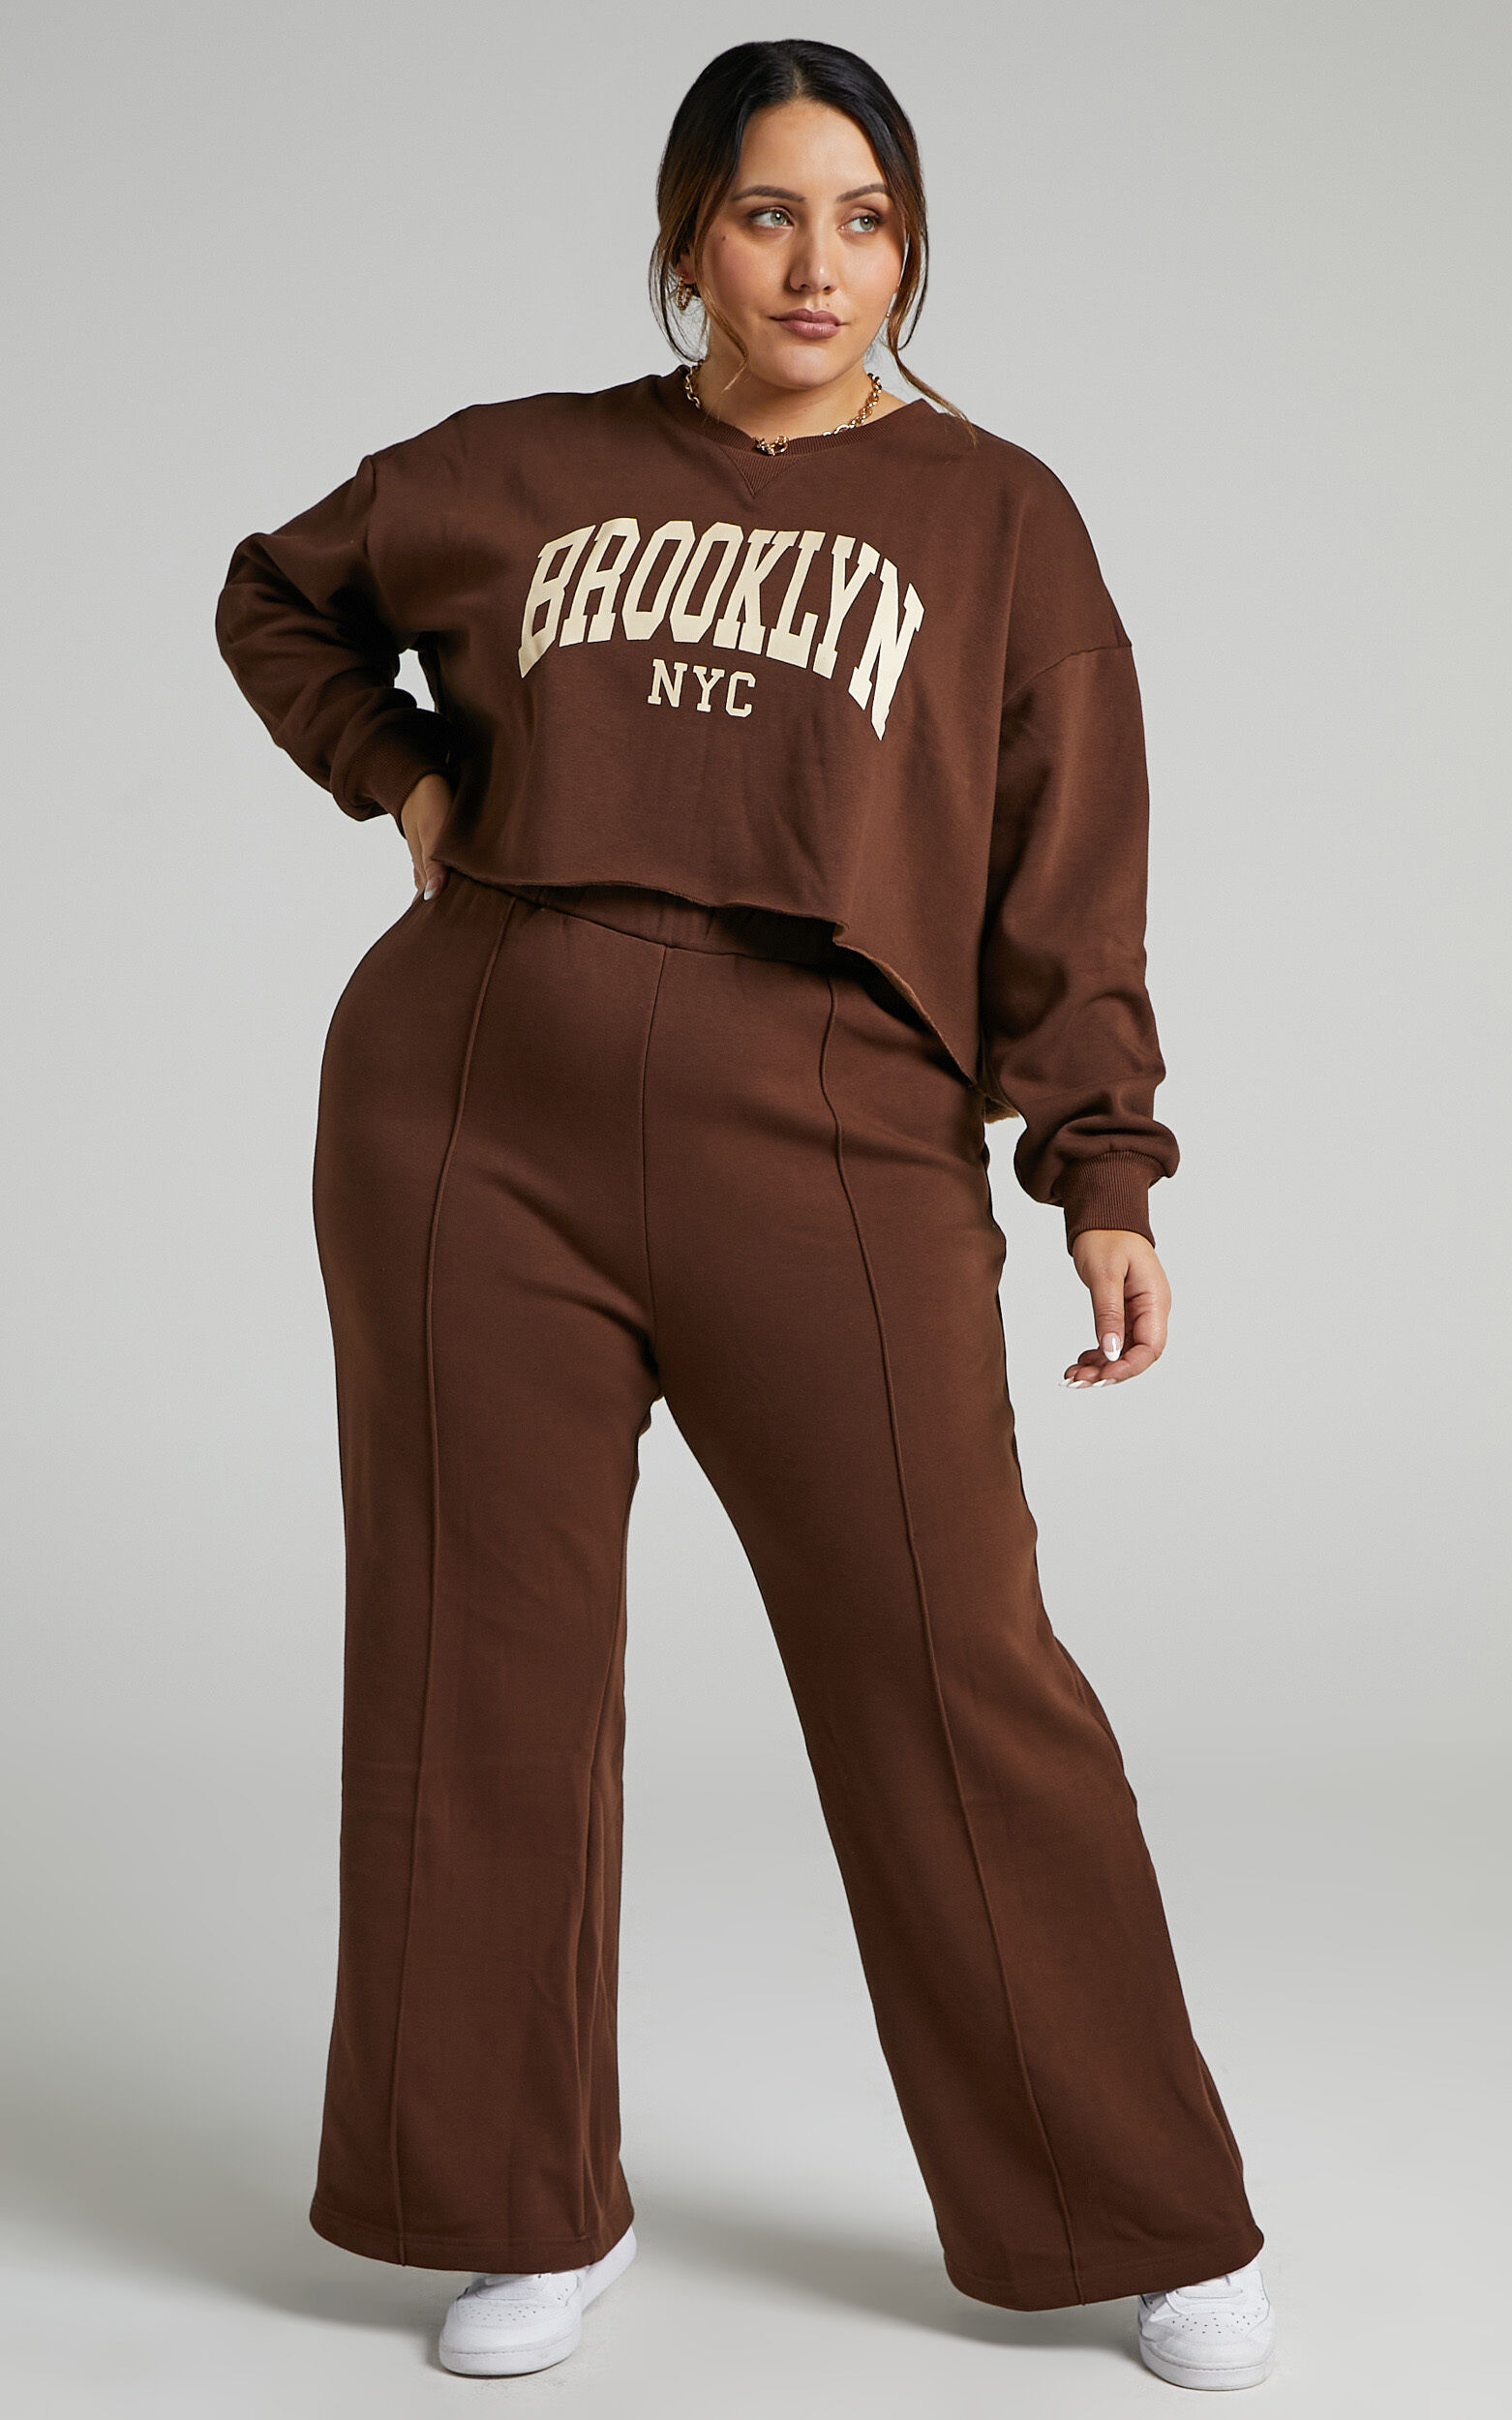 Sunday Society Club - Kenley Bootleg Sweat Pants in Chocolate - 04, BRN1, super-hi-res image number null